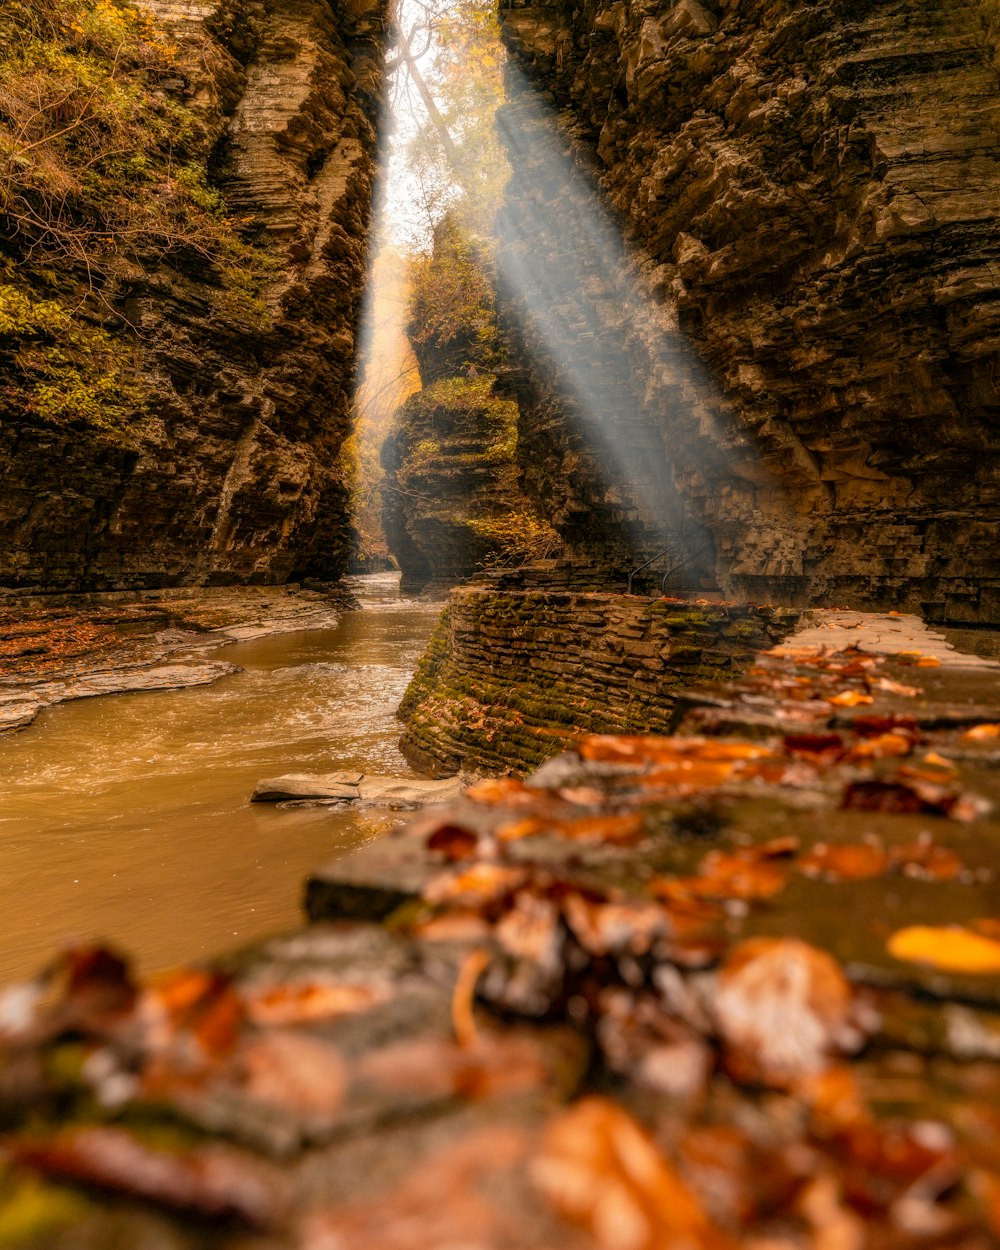 a light beam shines into a river surrounded by rocks